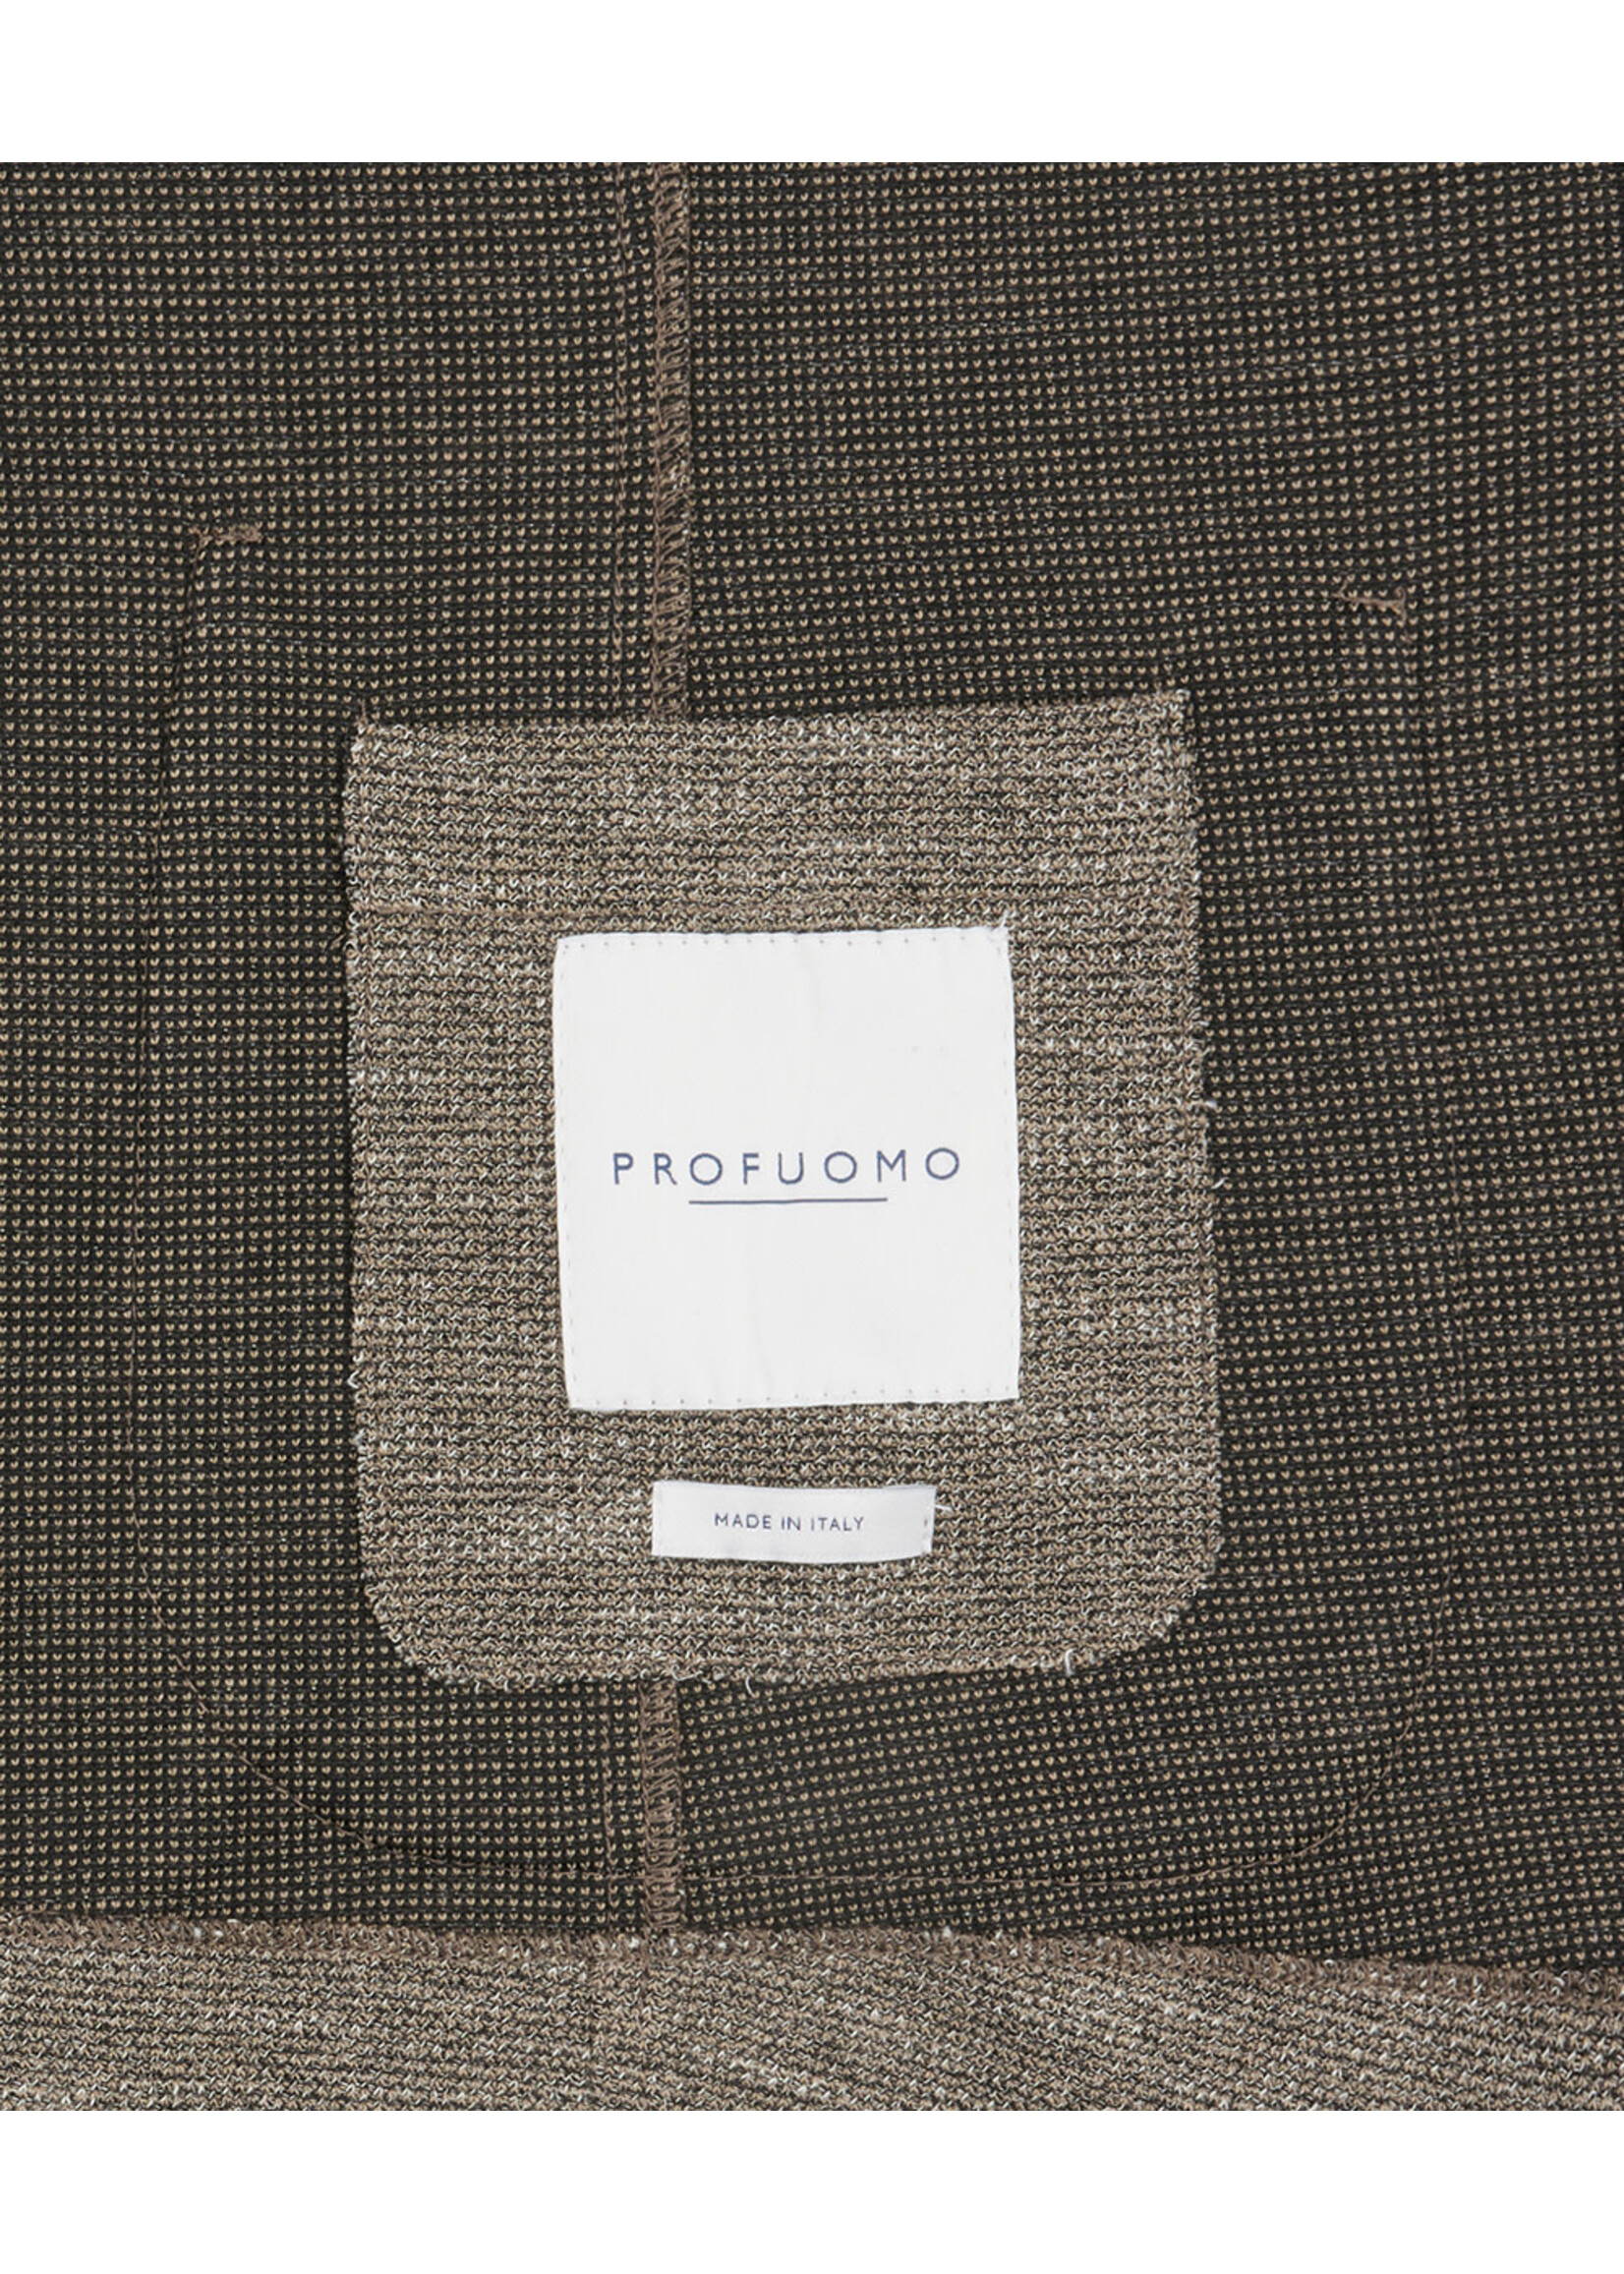 Profuomo Jacket knitted